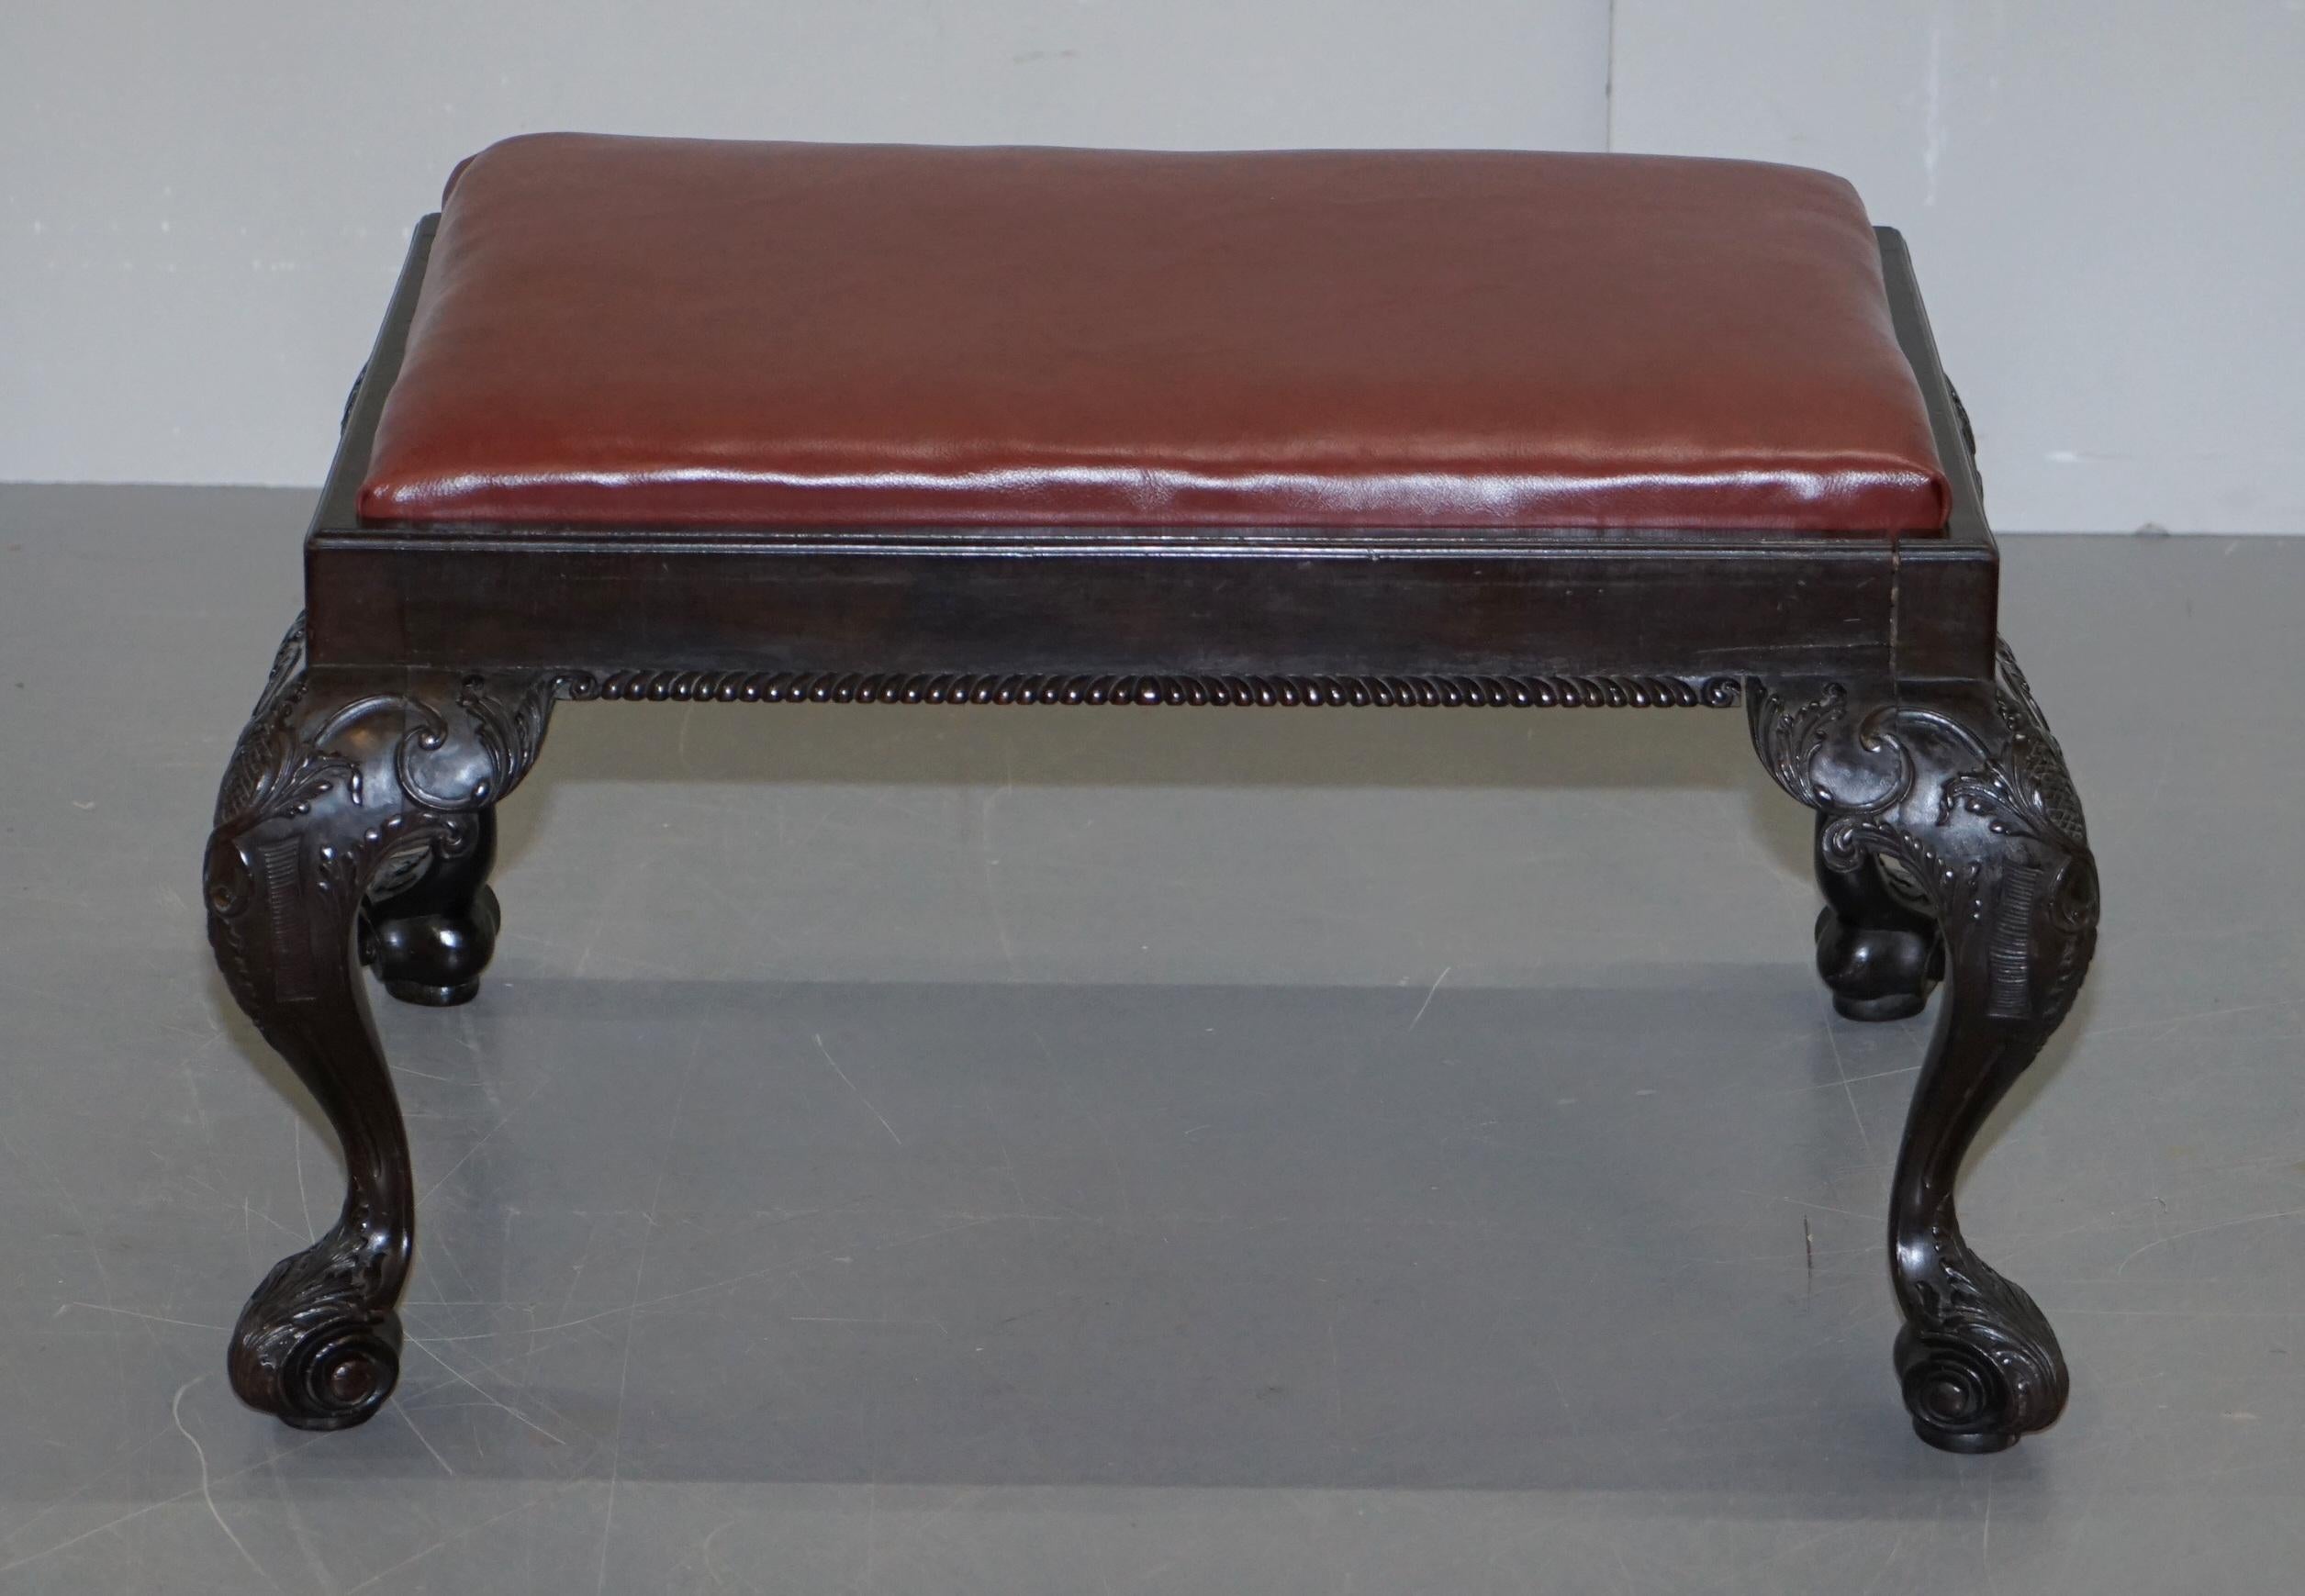 We are delighted to offer for sale this lovely Georgian circa 1820 hand carved English footstool with new leather upholstery

A very good looking and well made piece, the frame is 200+ years old, you can see the hand chisel marks to the base. The